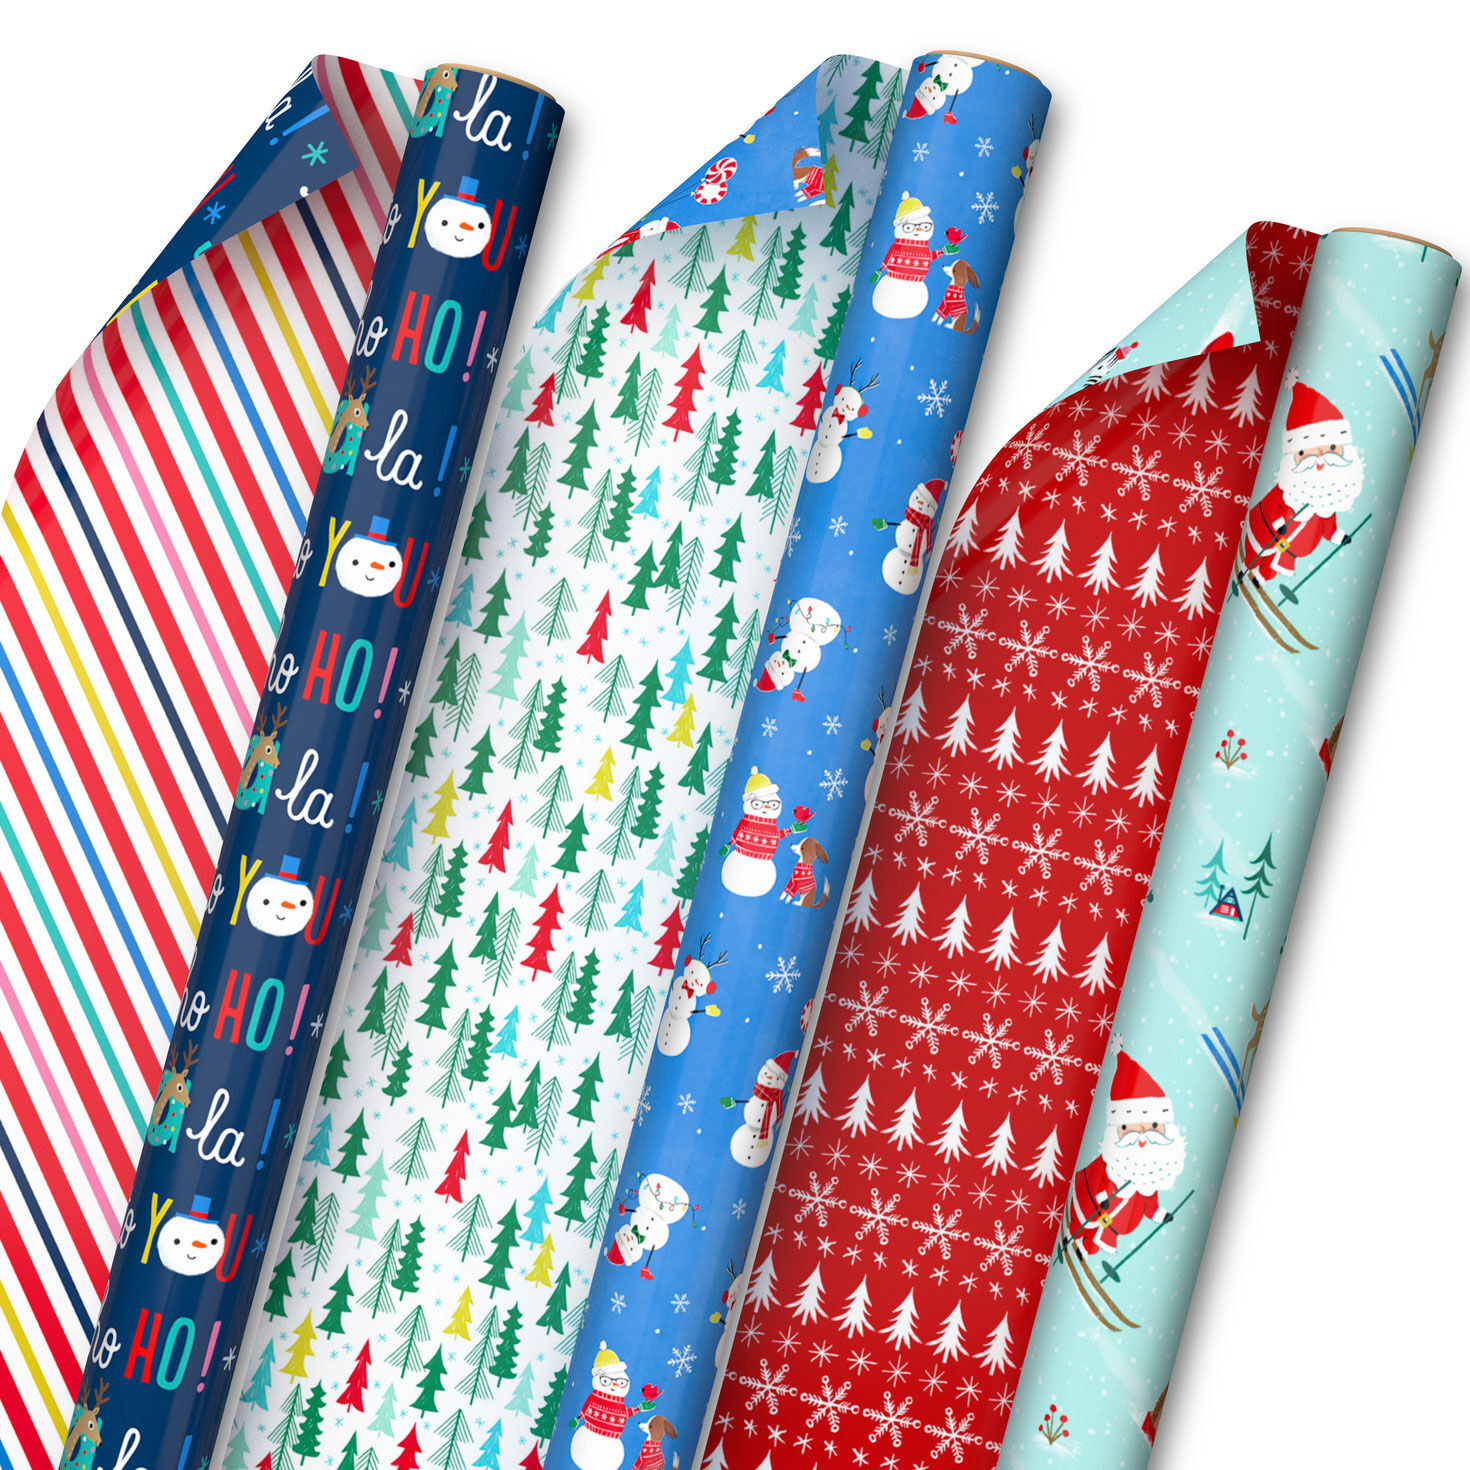 Red & Green Christmas Wrapping Paper Roll Bundle